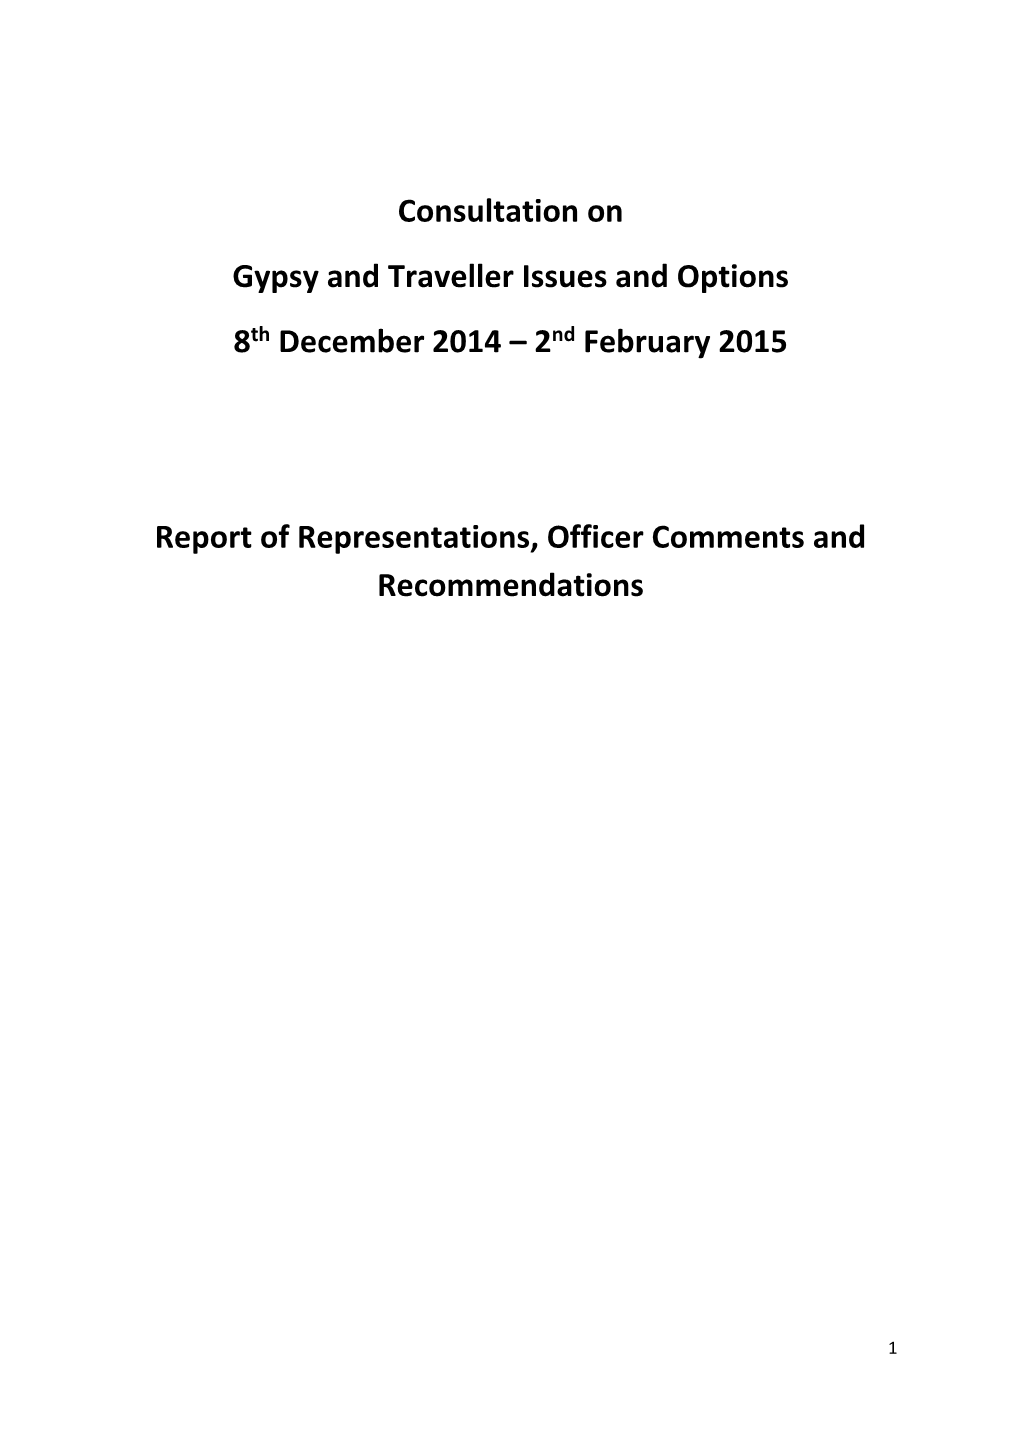 Consultation on Gypsy and Traveller Issues and Options 8Th December 2014 – 2Nd February 2015